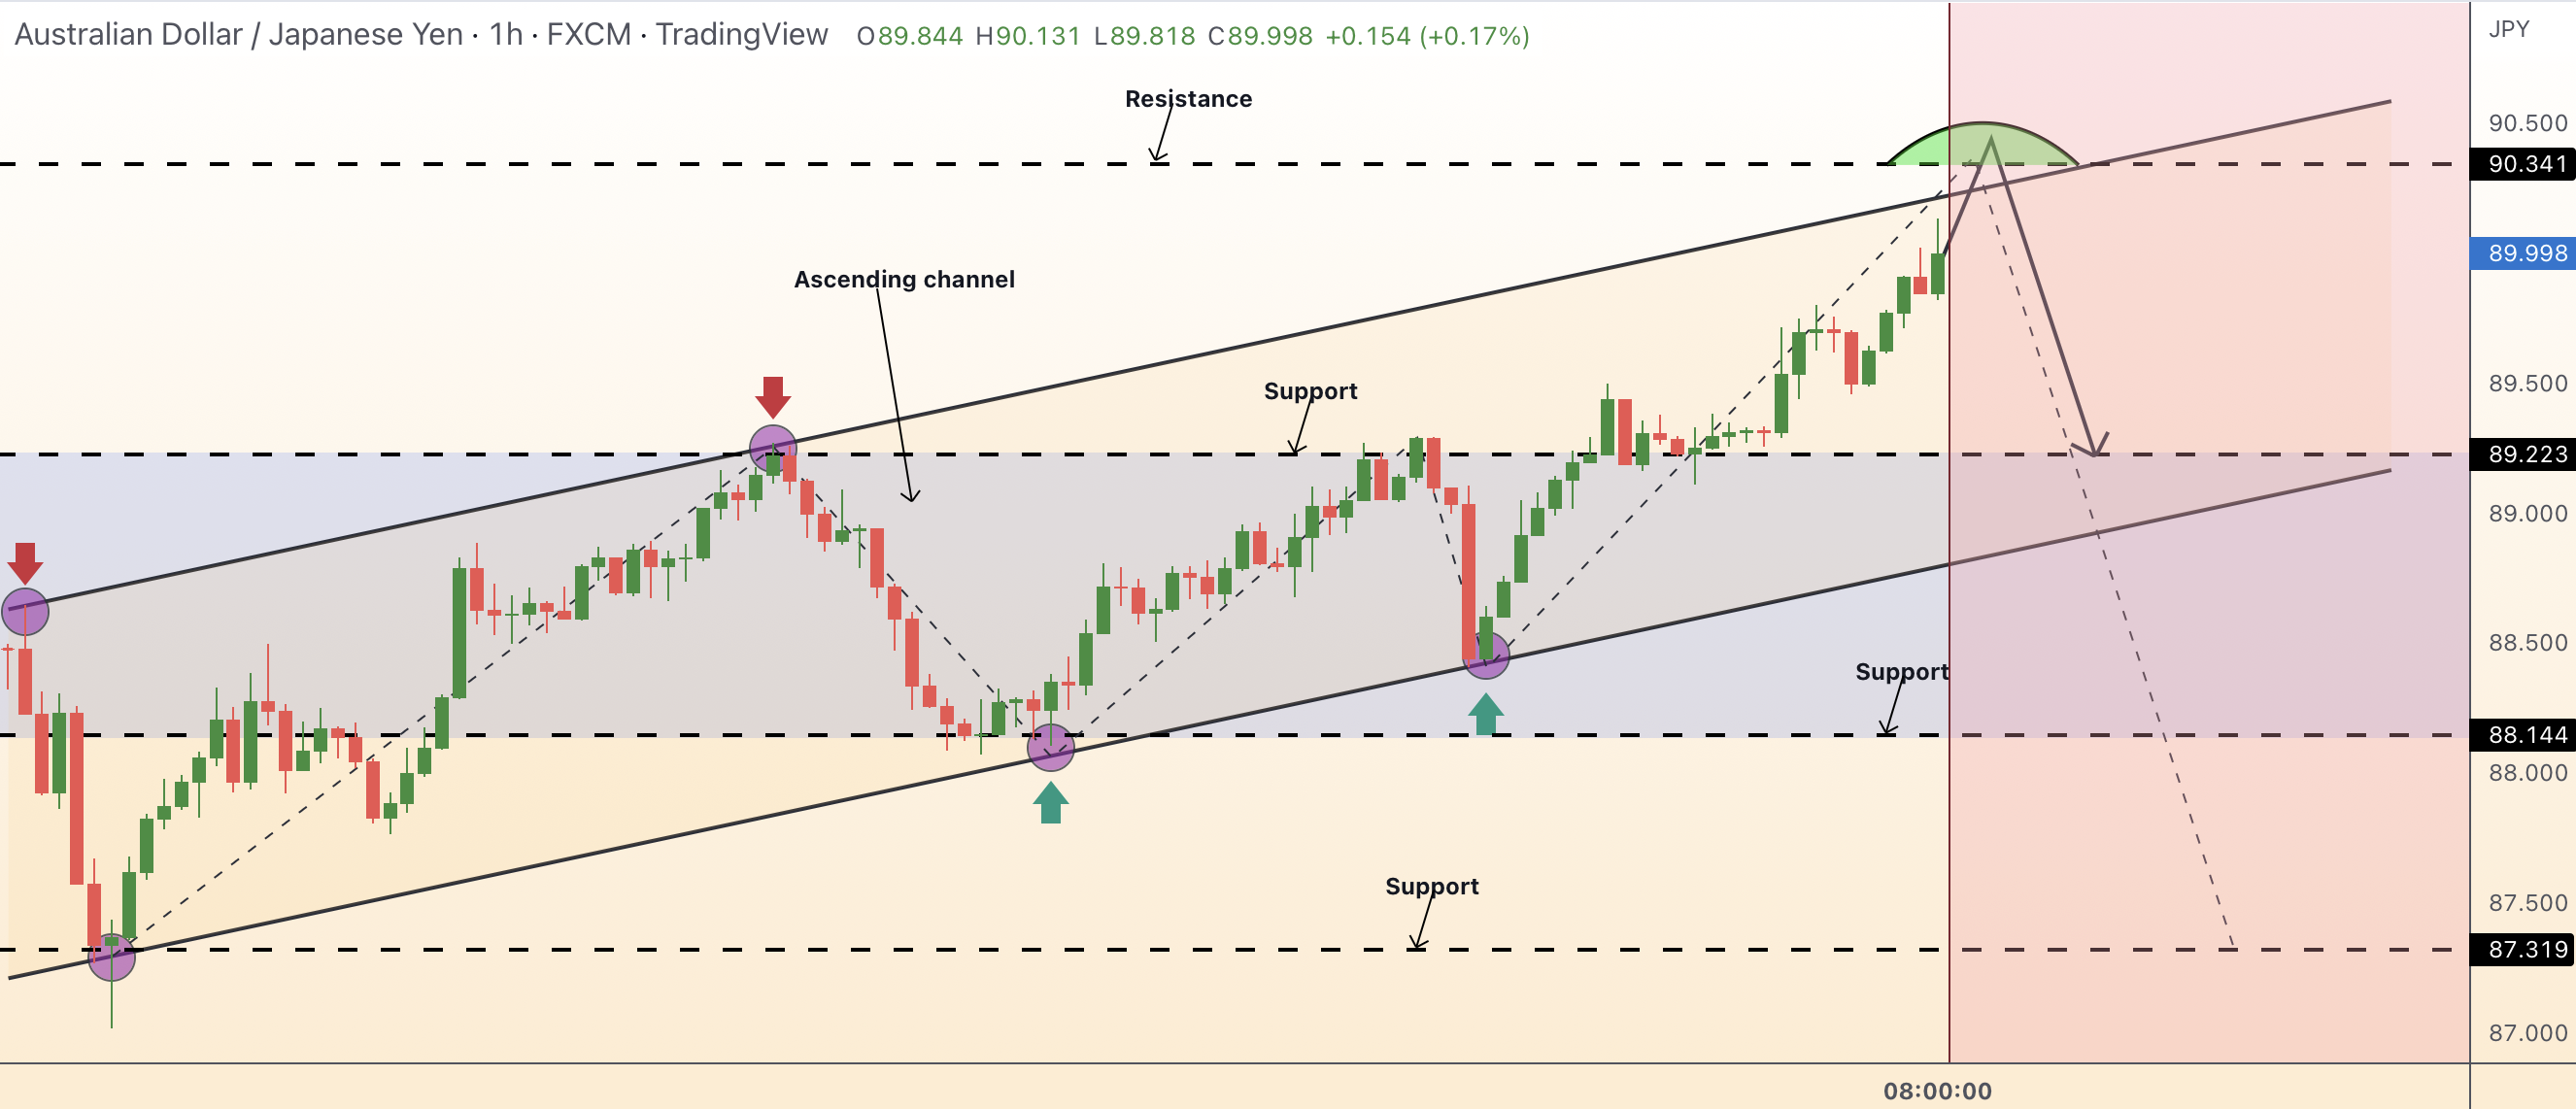 AUDJPY opportunity to sell